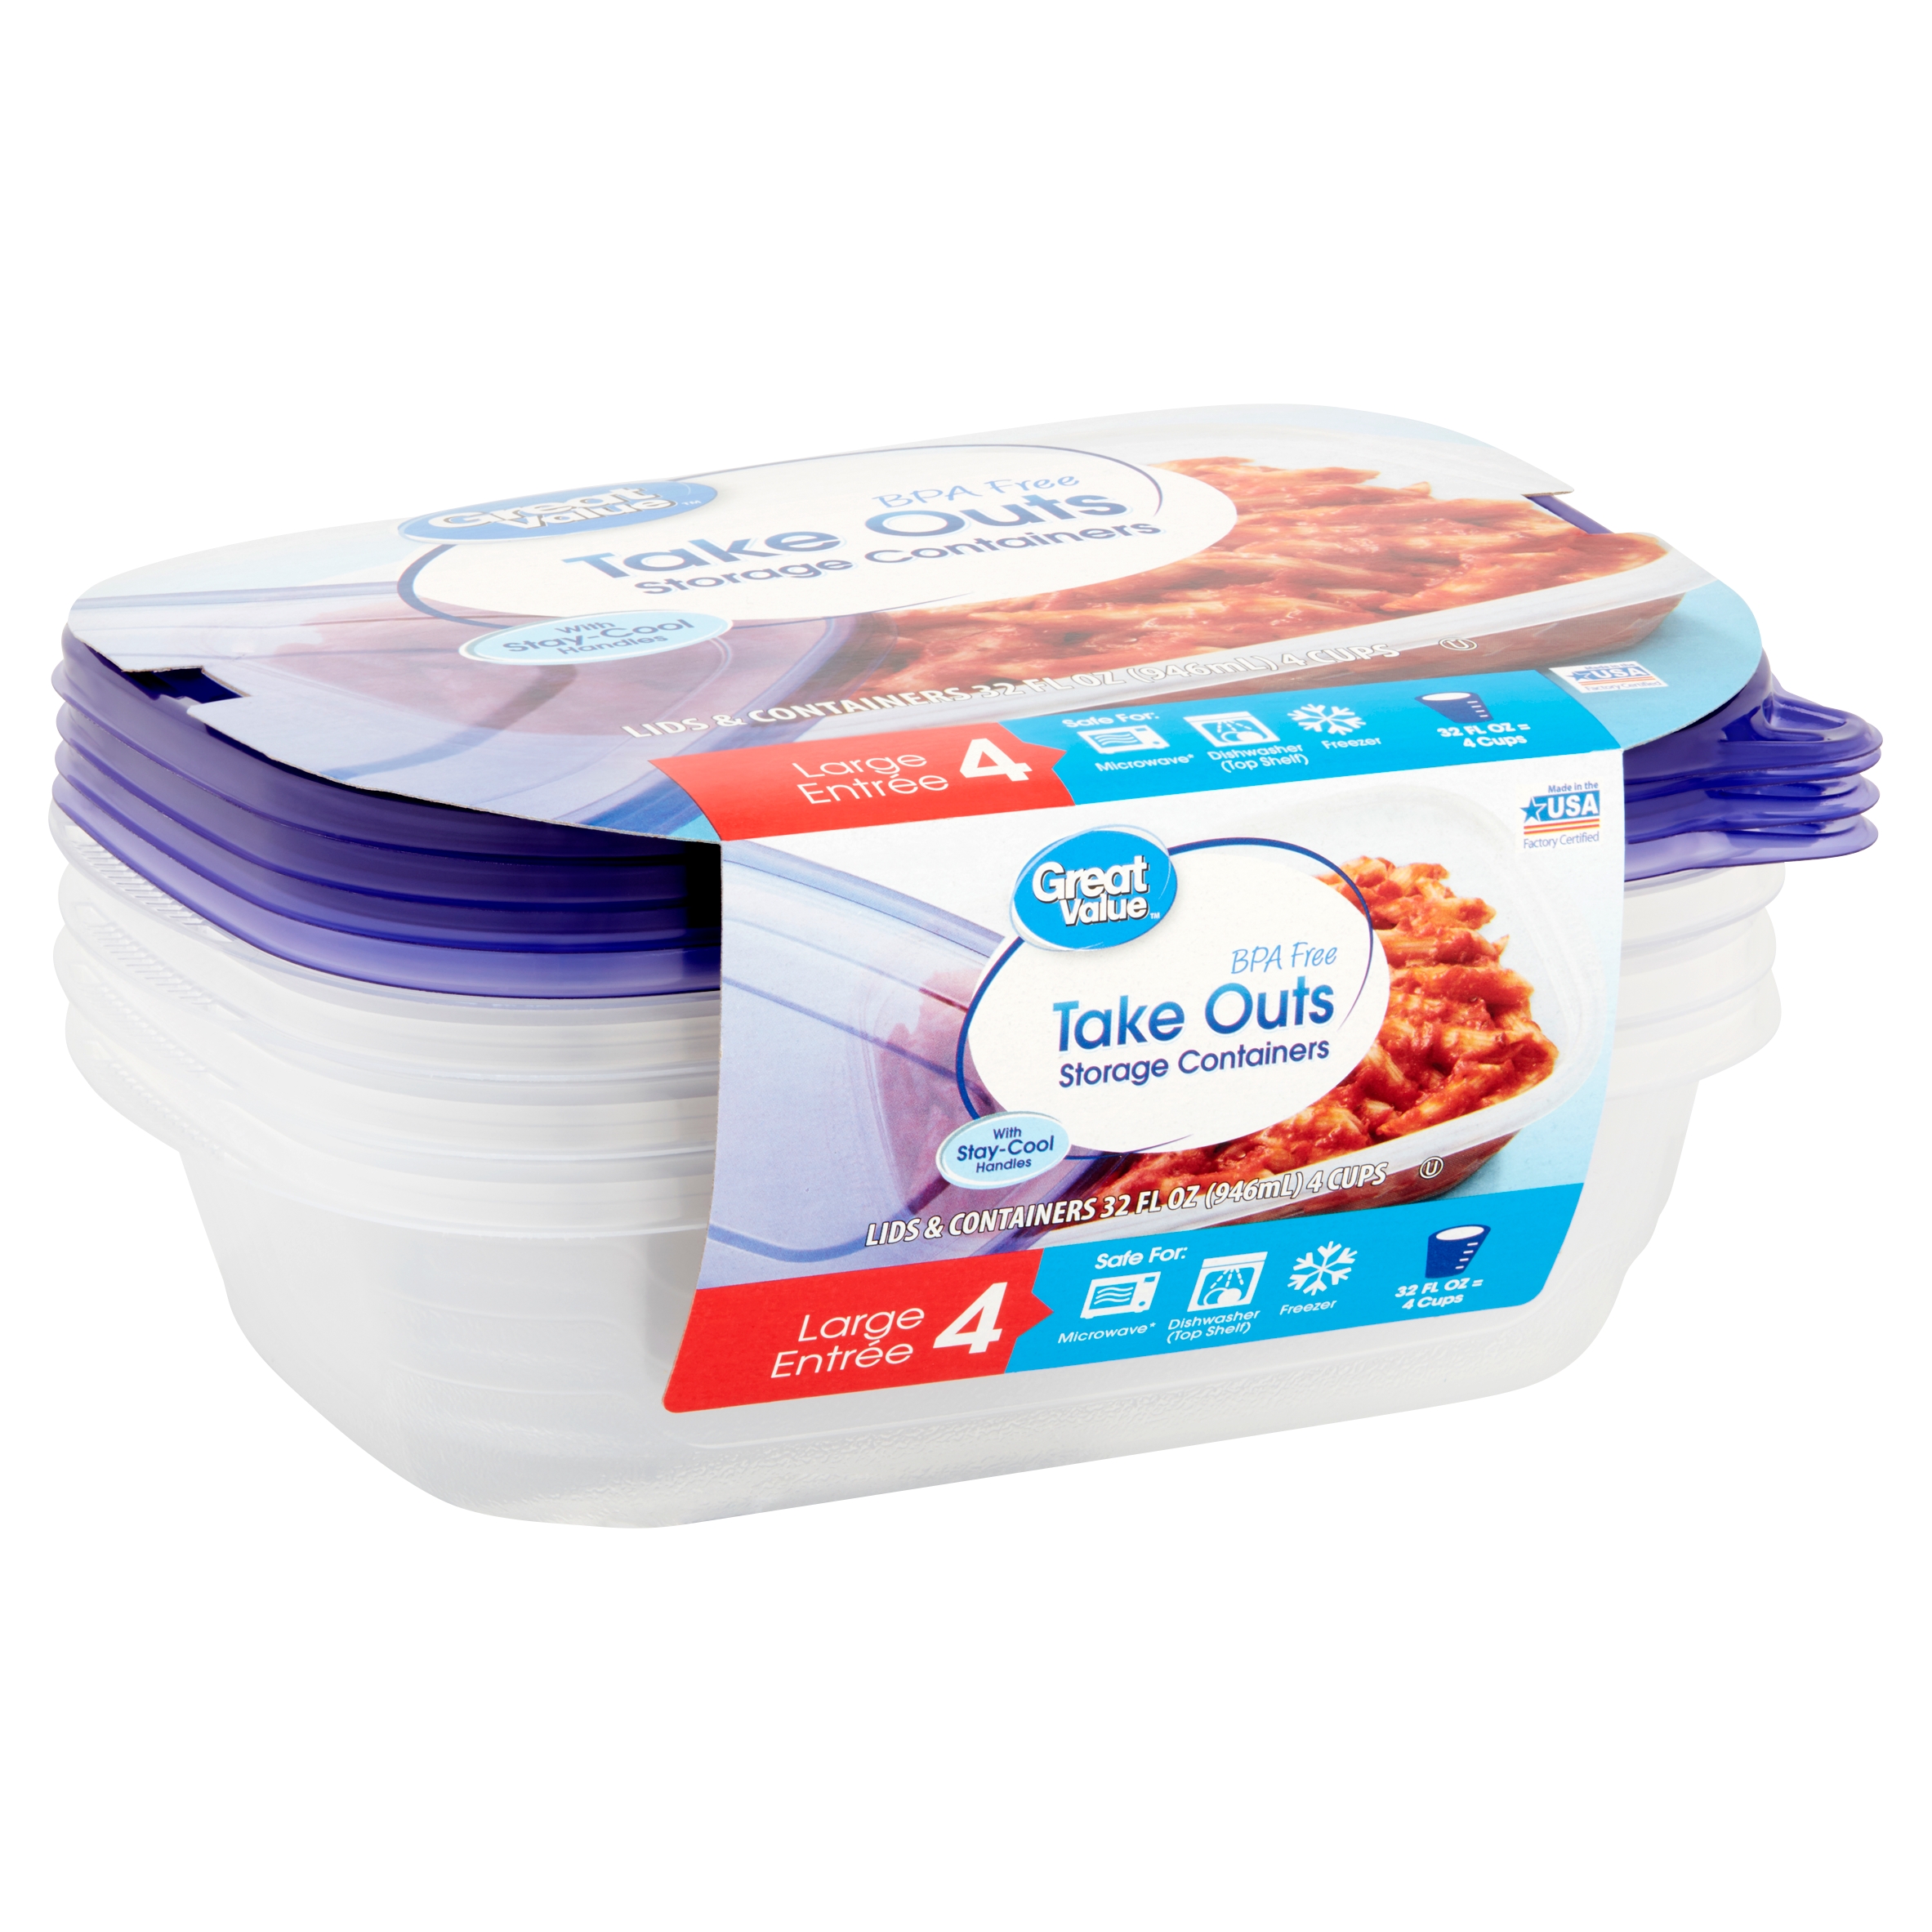 Great Value Take Outs 32 fl oz Storage Container, 4 count - image 1 of 9